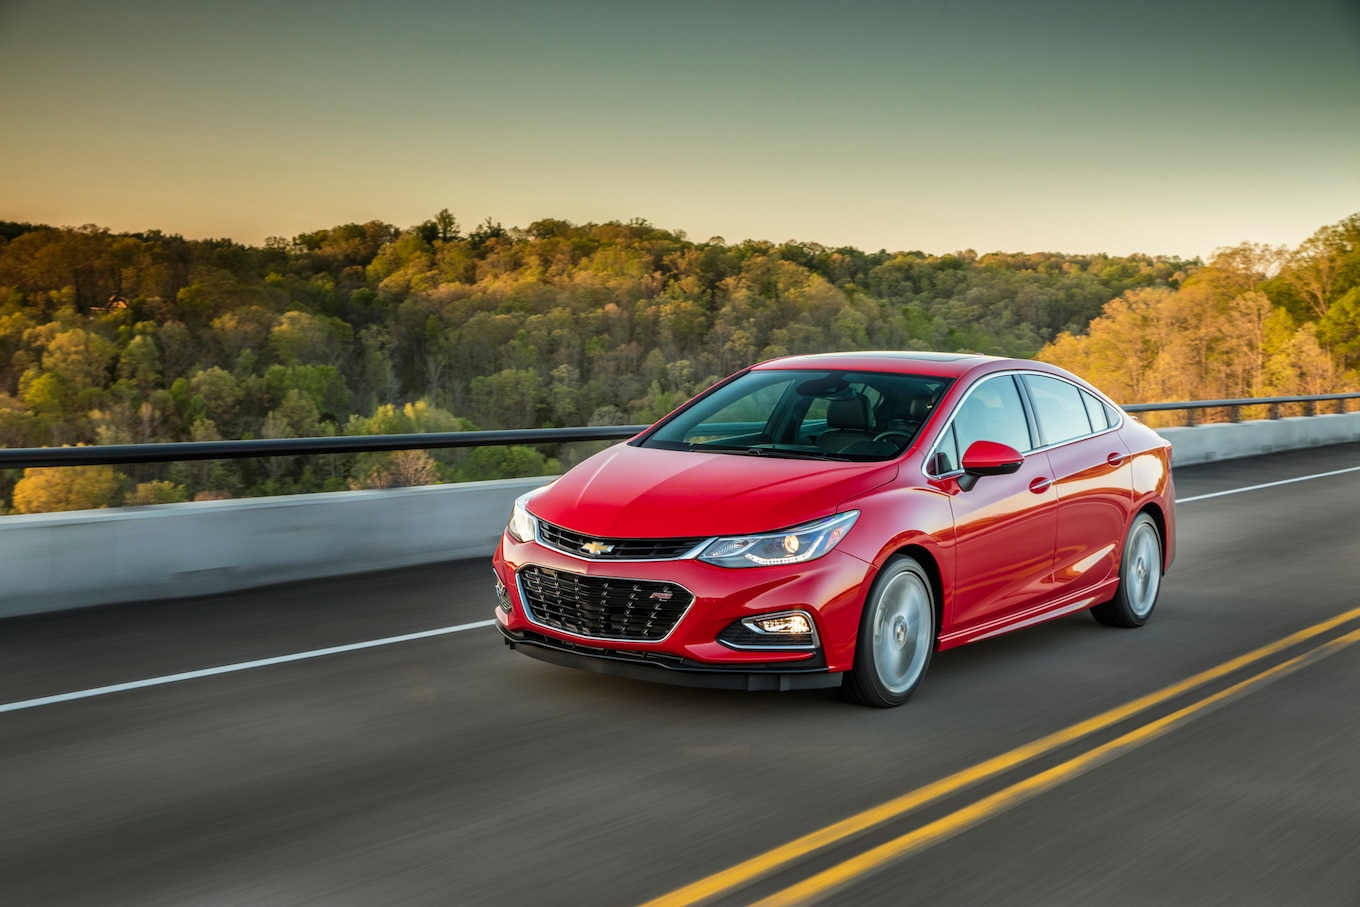 2016 Chevrolet Cruze front three quarter in motion 05